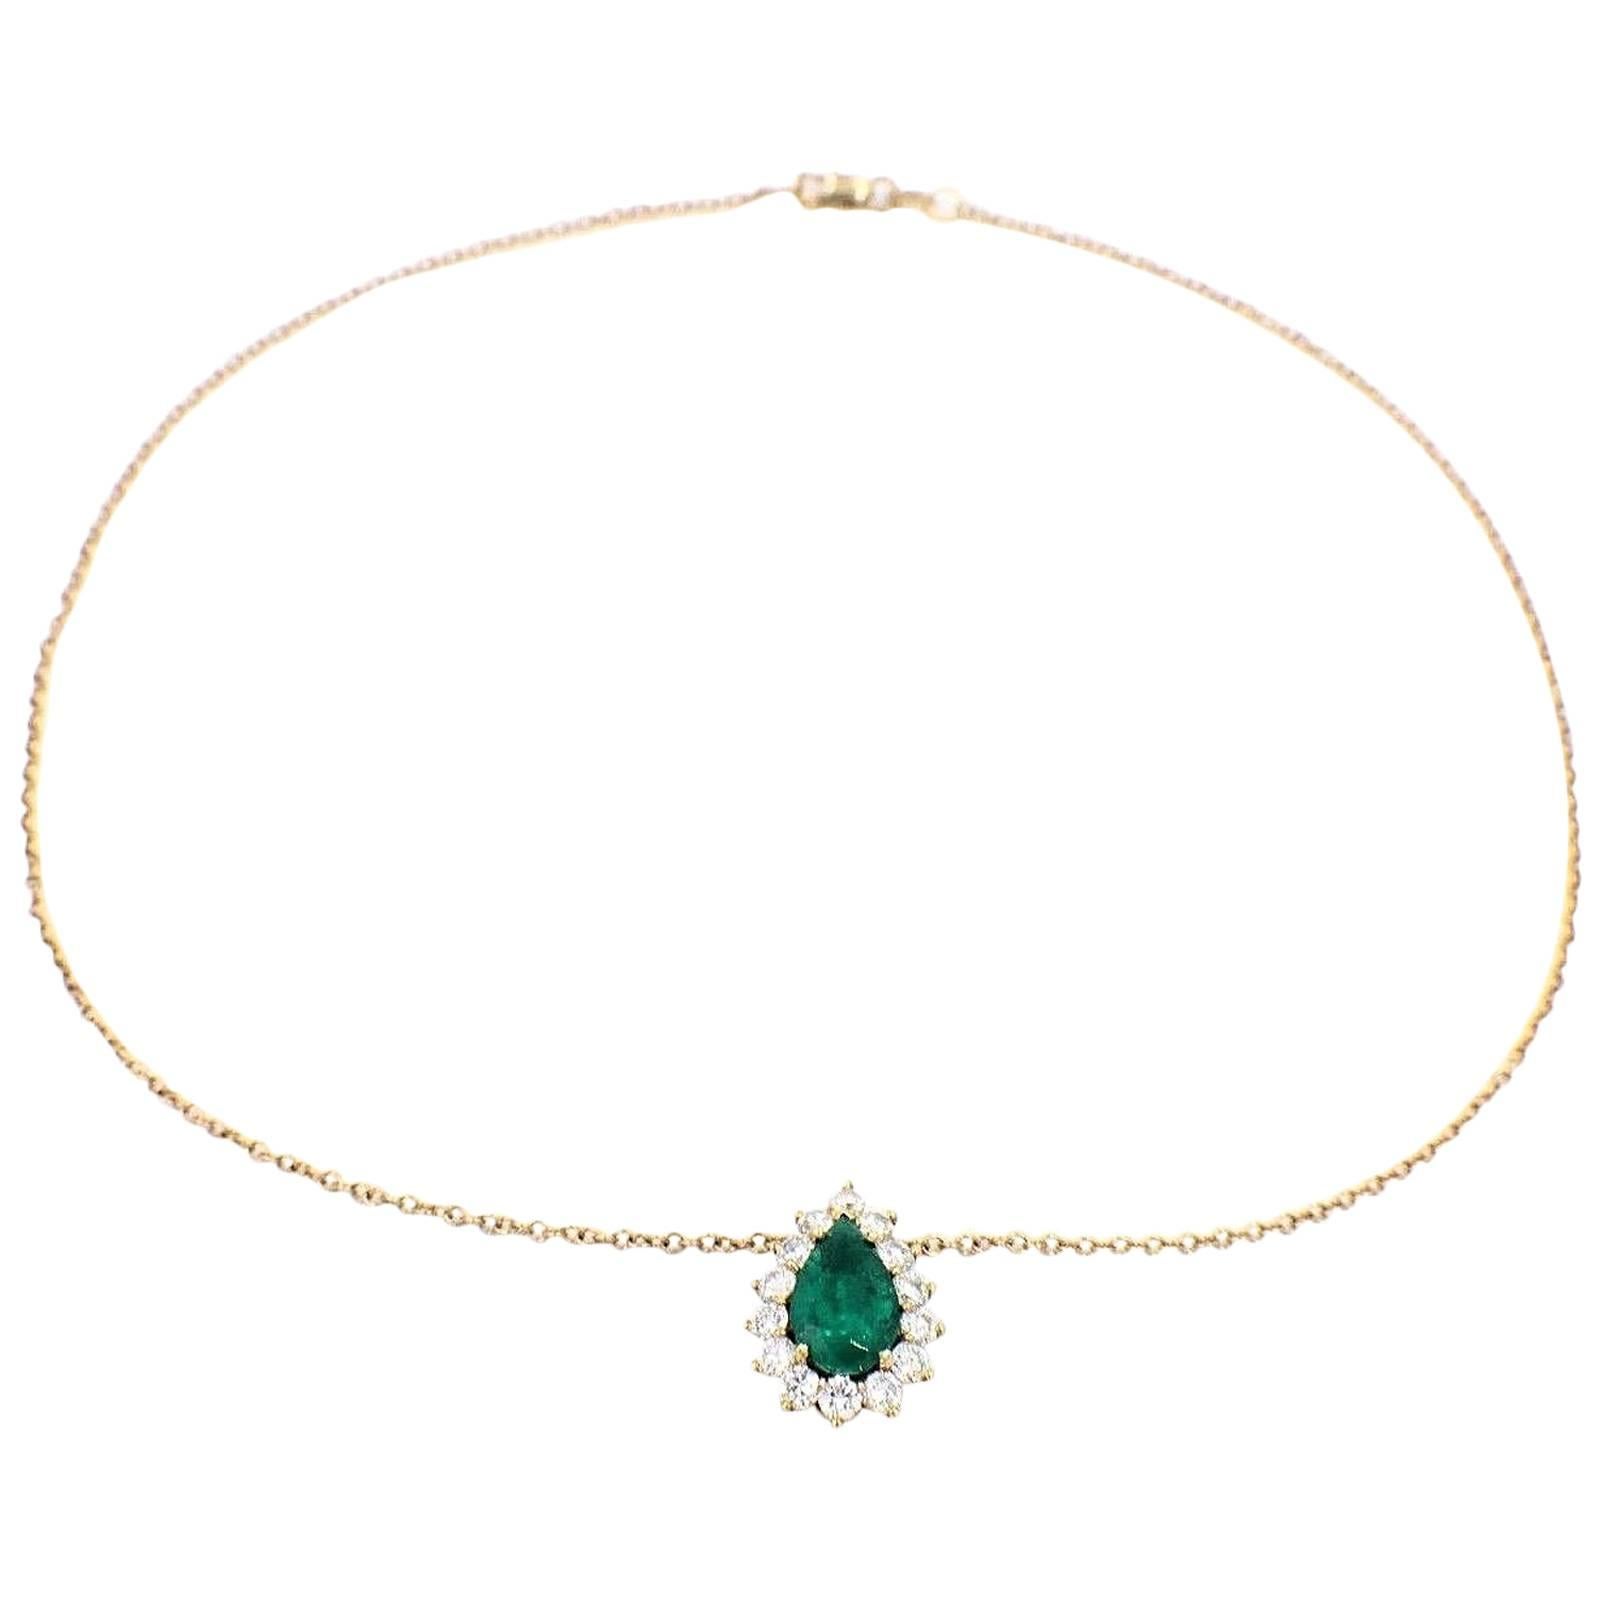 Pear Shape Emerald and Diamond 6.00 Carat Necklace in 18 Karat Yellow Gold